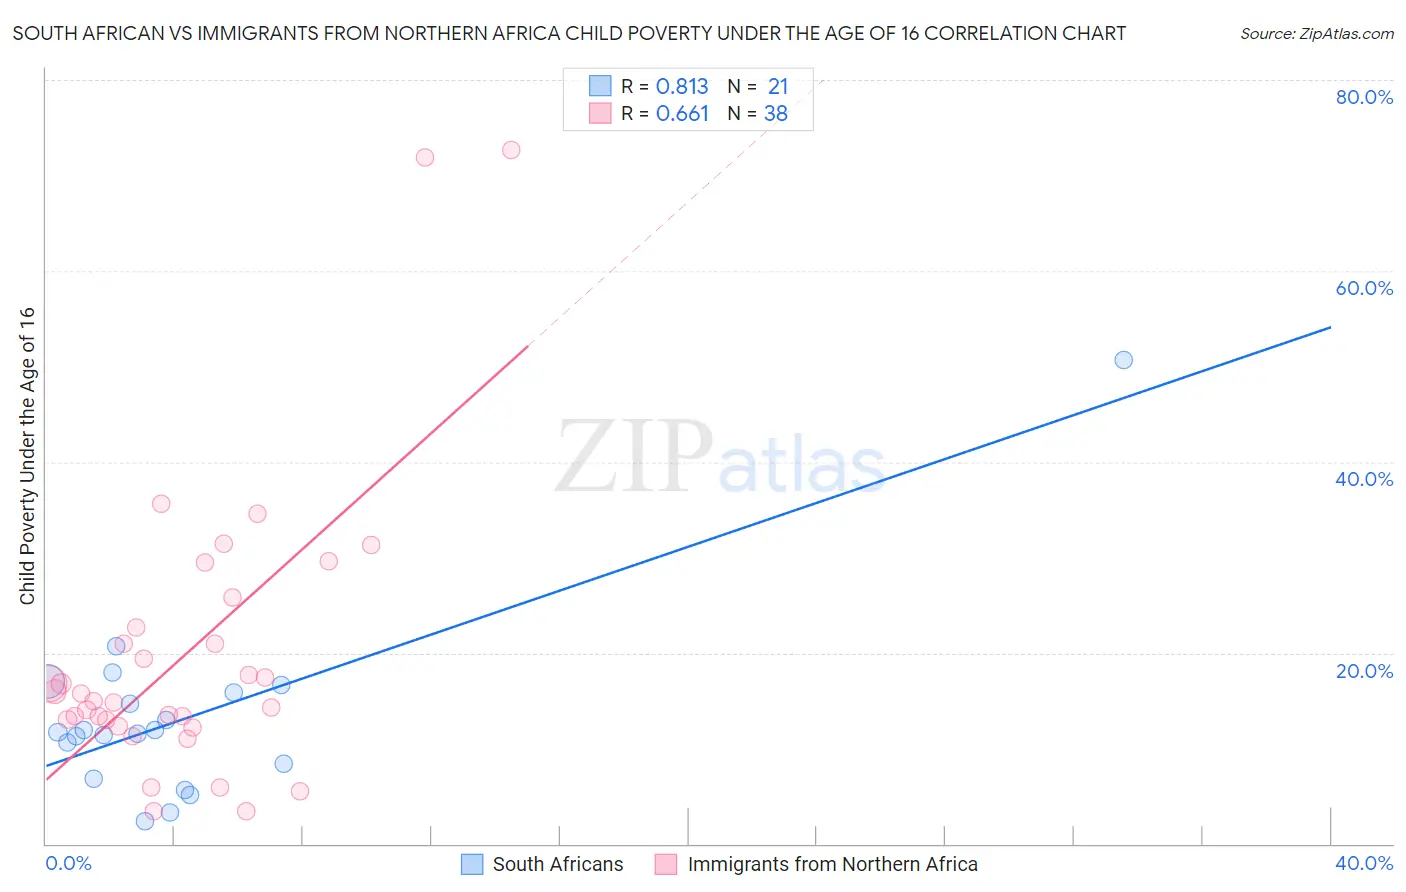 South African vs Immigrants from Northern Africa Child Poverty Under the Age of 16